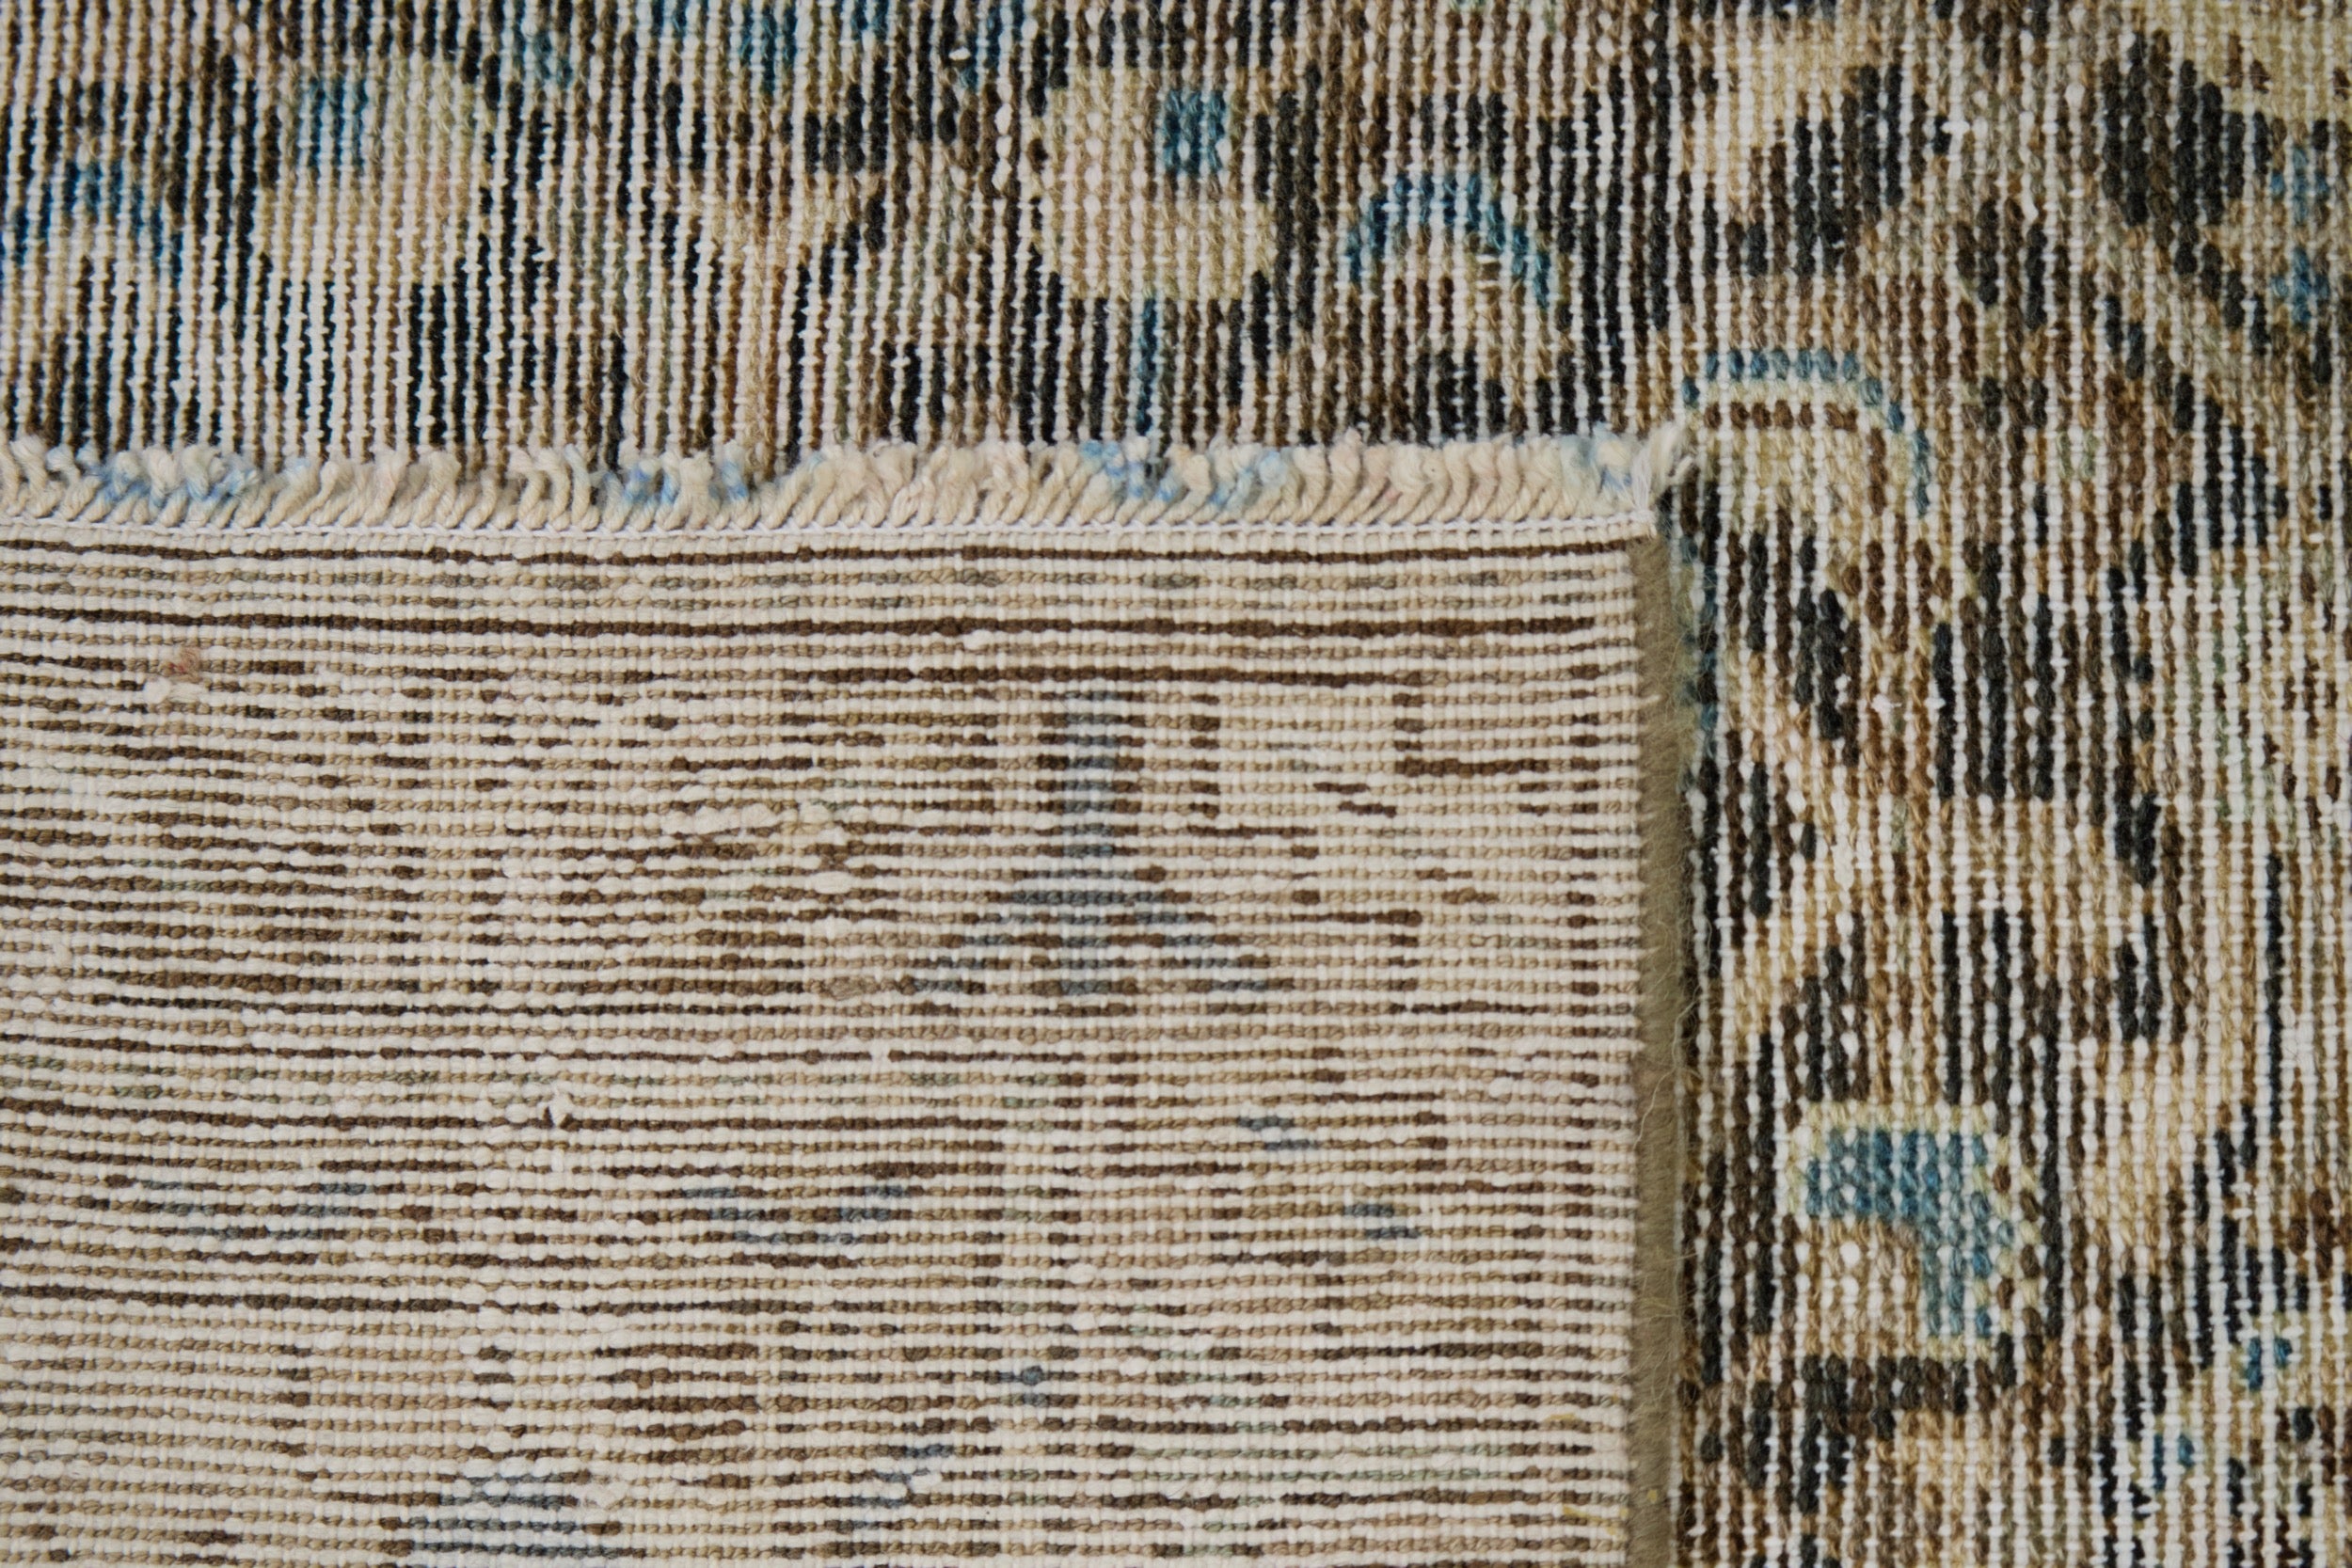 The Artisanal Depth of Shateque - Wool and Cotton Blend | Kuden Rugs